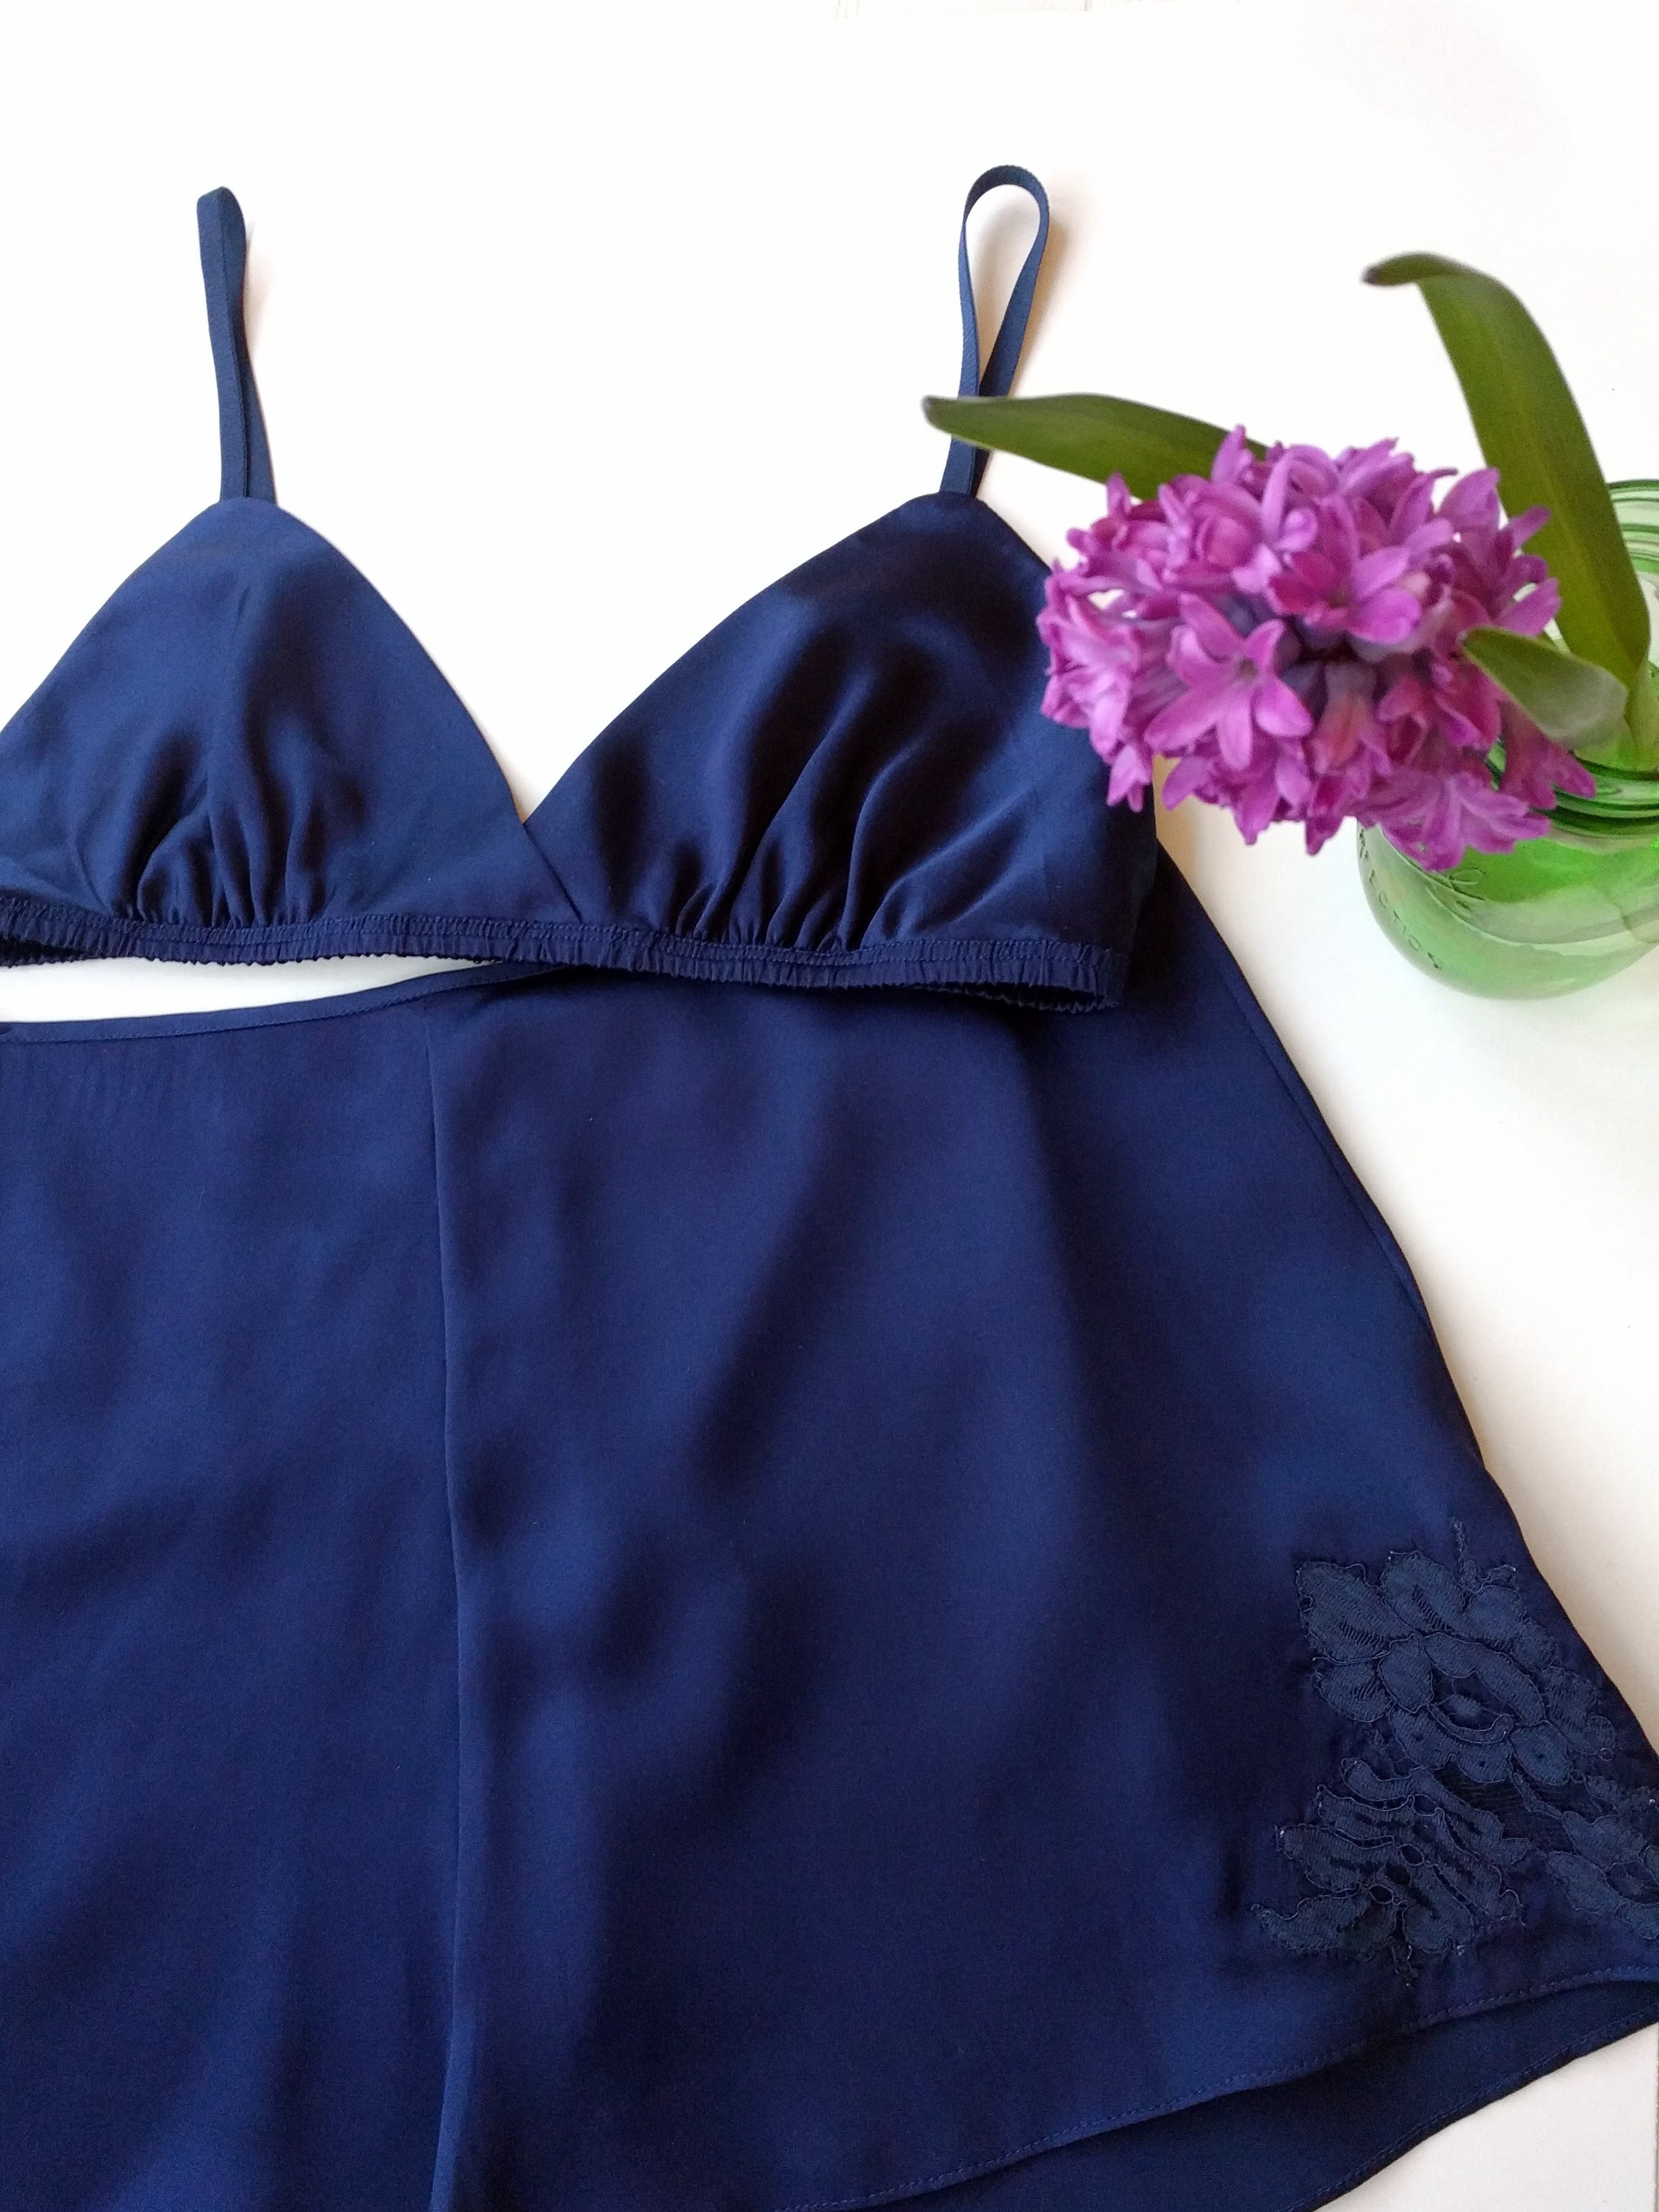 Six Inch Royal Blue Floral Stretch Lace - Bra-makers Supply